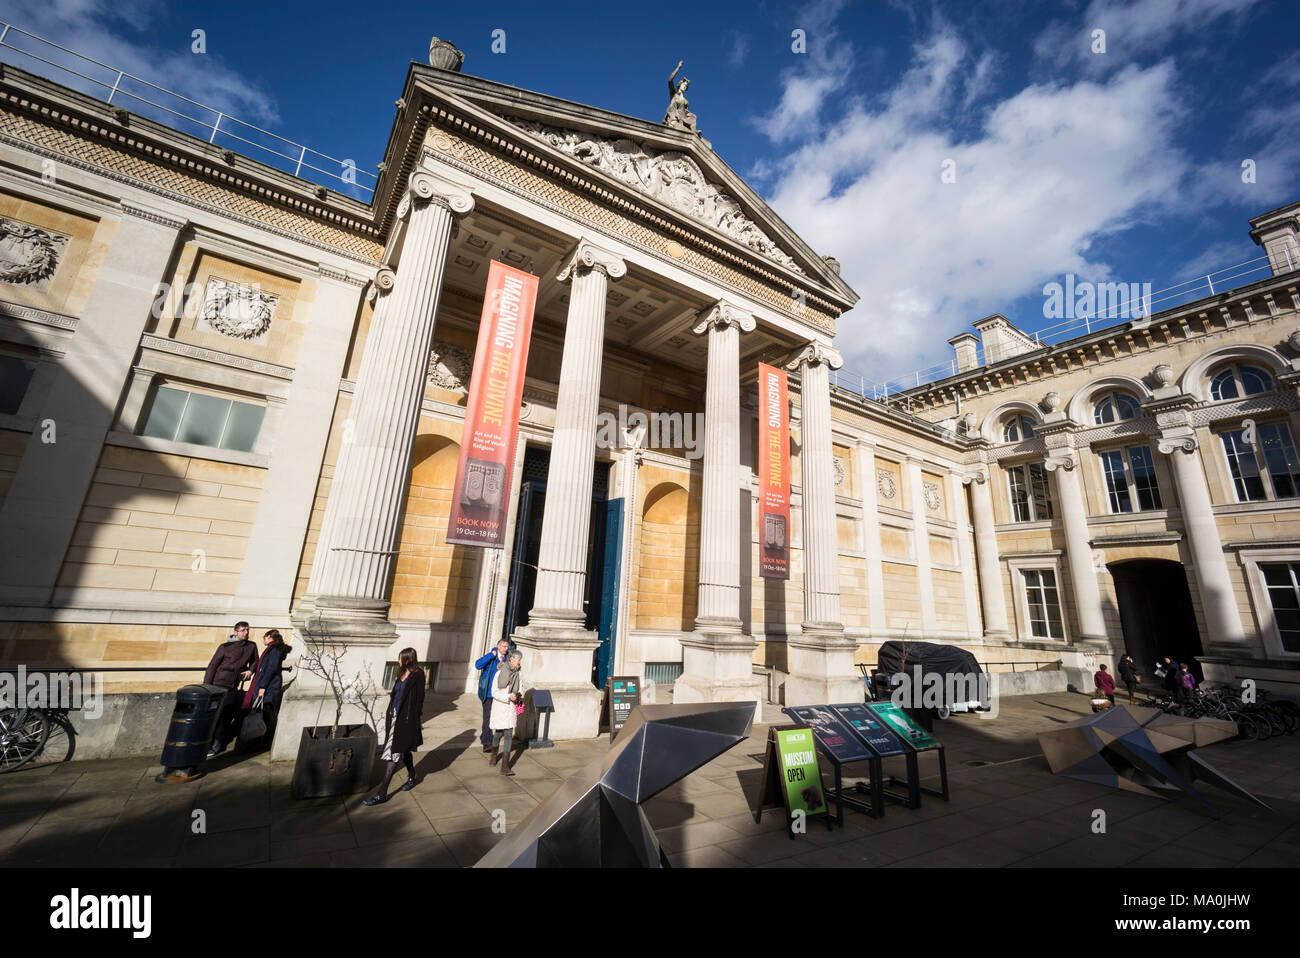 Oxford. England. The Ashmolean Museum, main entrance exterior. Greek revival façade and portico by Charles Robert Cockerell built in 1845. Stock Photo